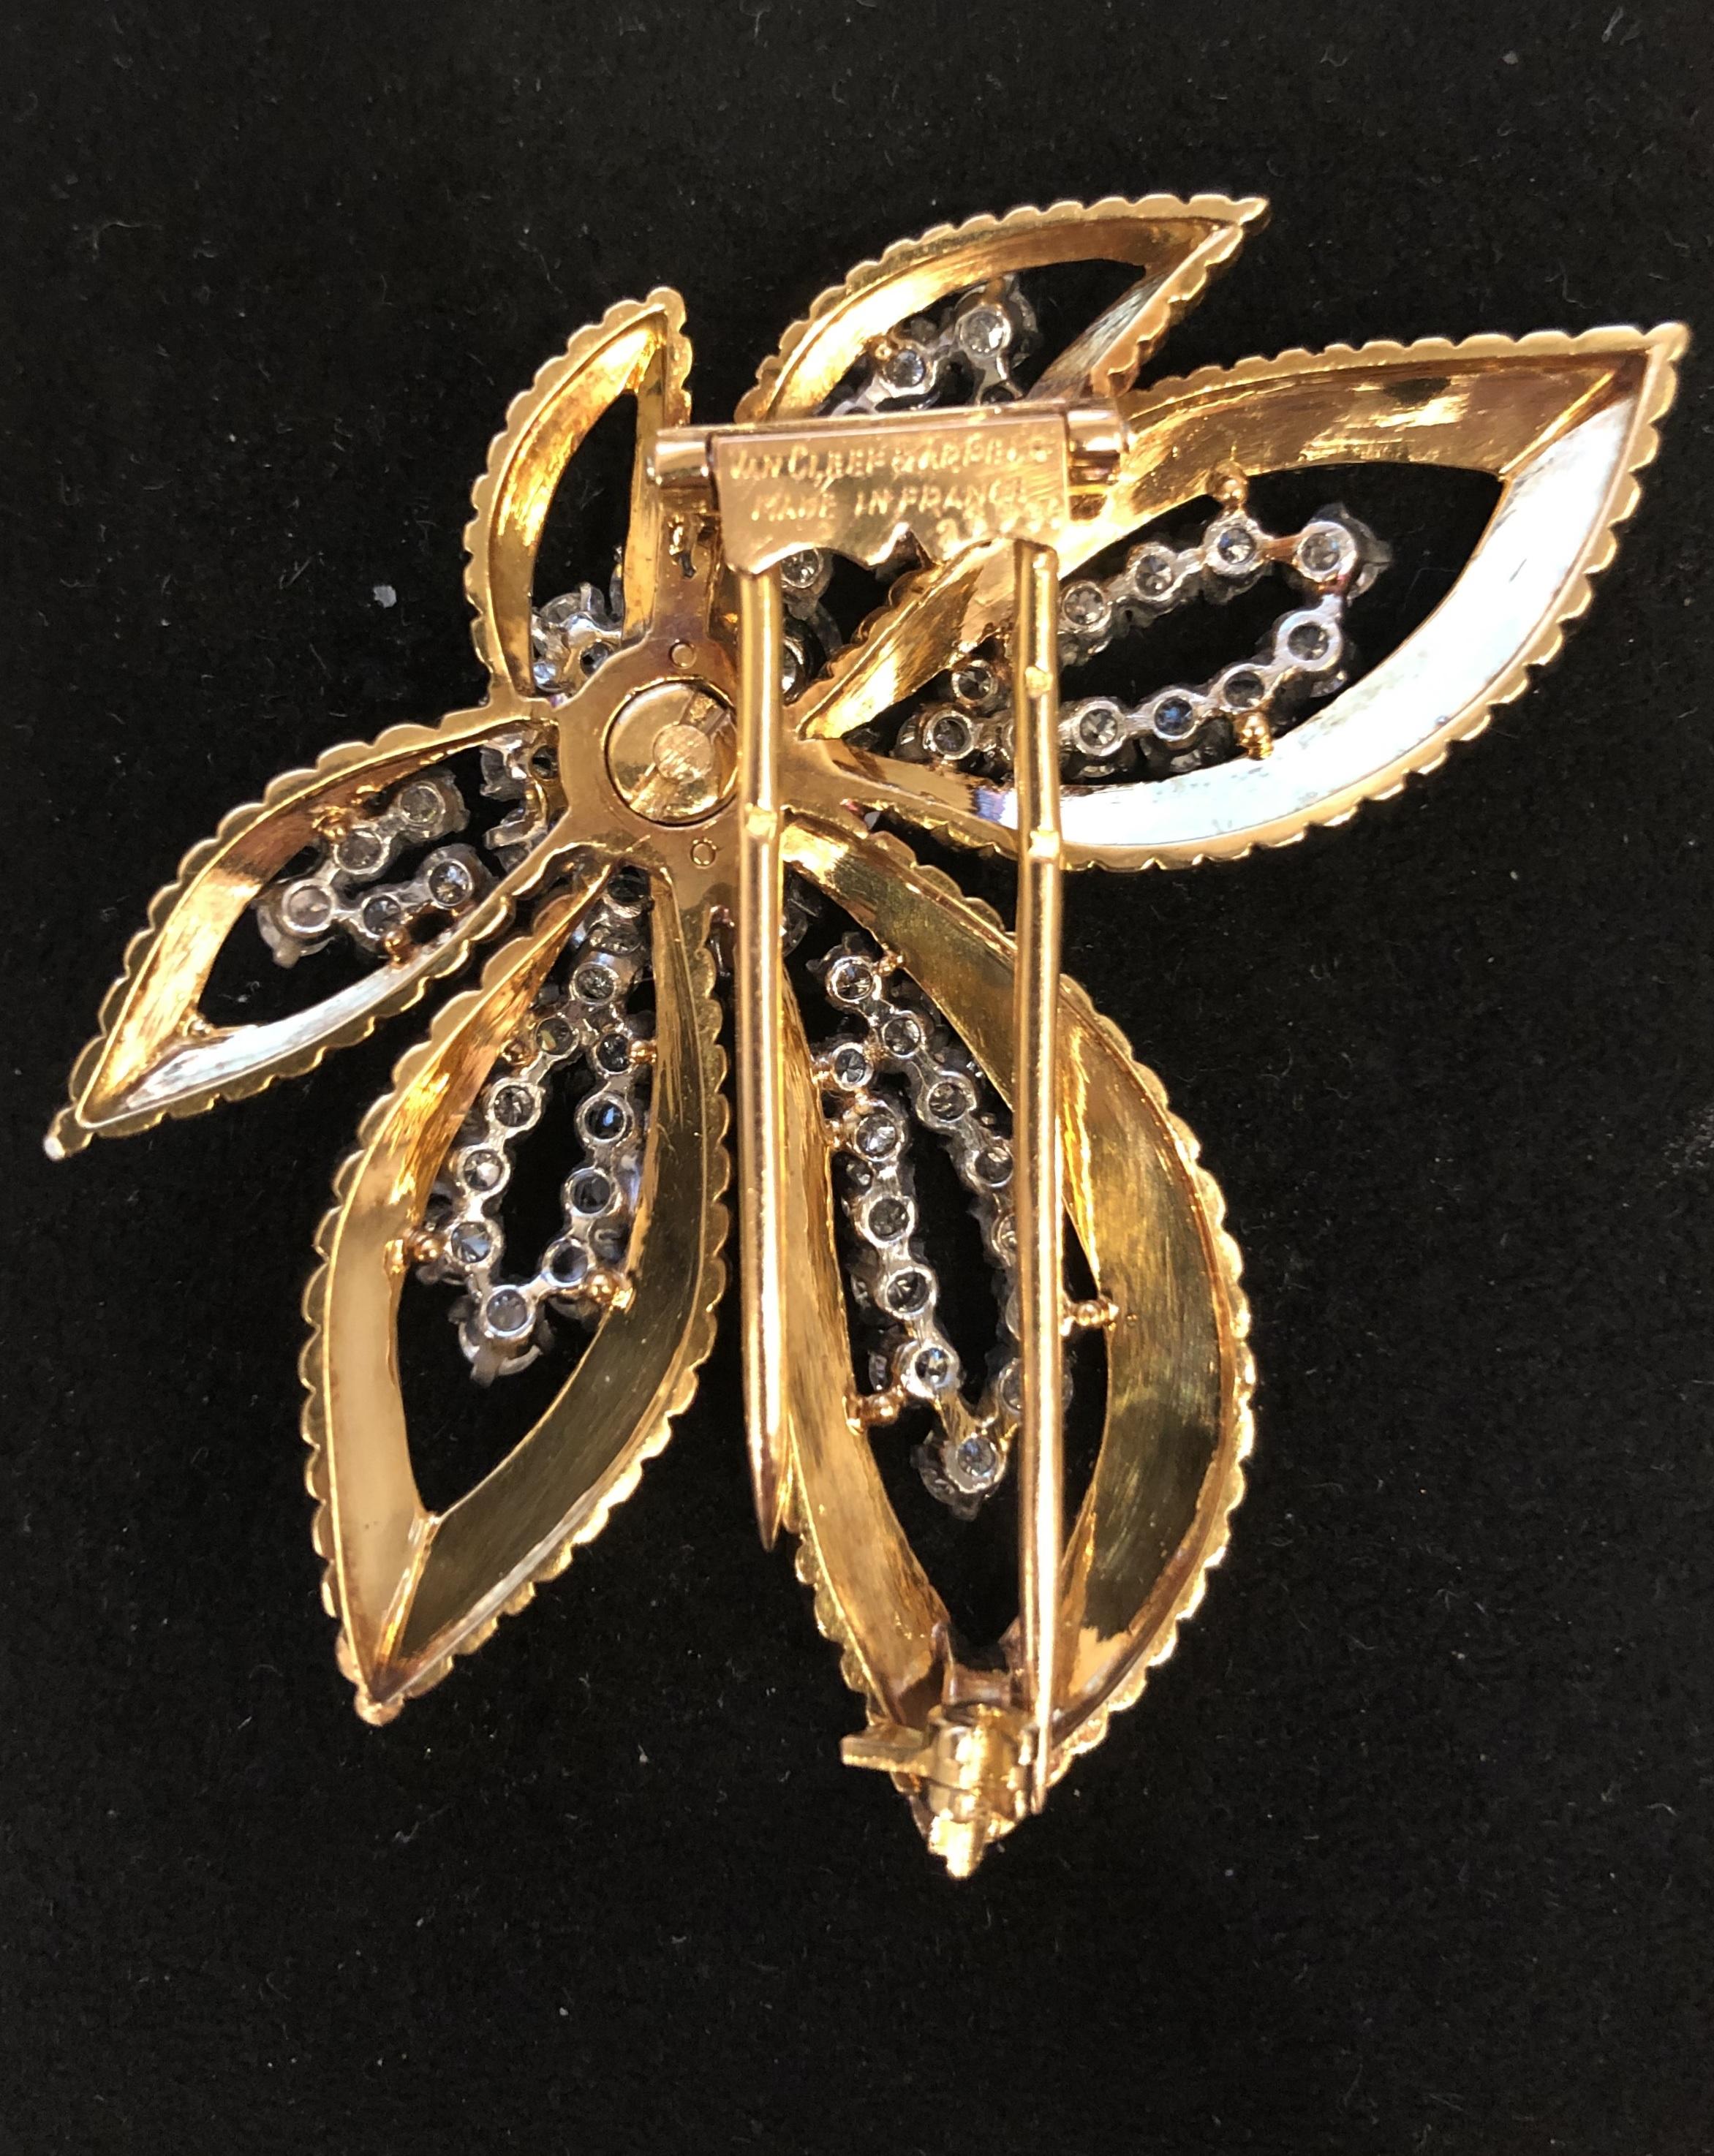 A French Mid-20th Century 18 karat gold and platinum brooch with diamonds and emerald by Van Cleef & Arpels. The brooch is done in a dynamic floral motif, with textured gold petals lined with round brilliant cut diamonds and centering on a cabachon